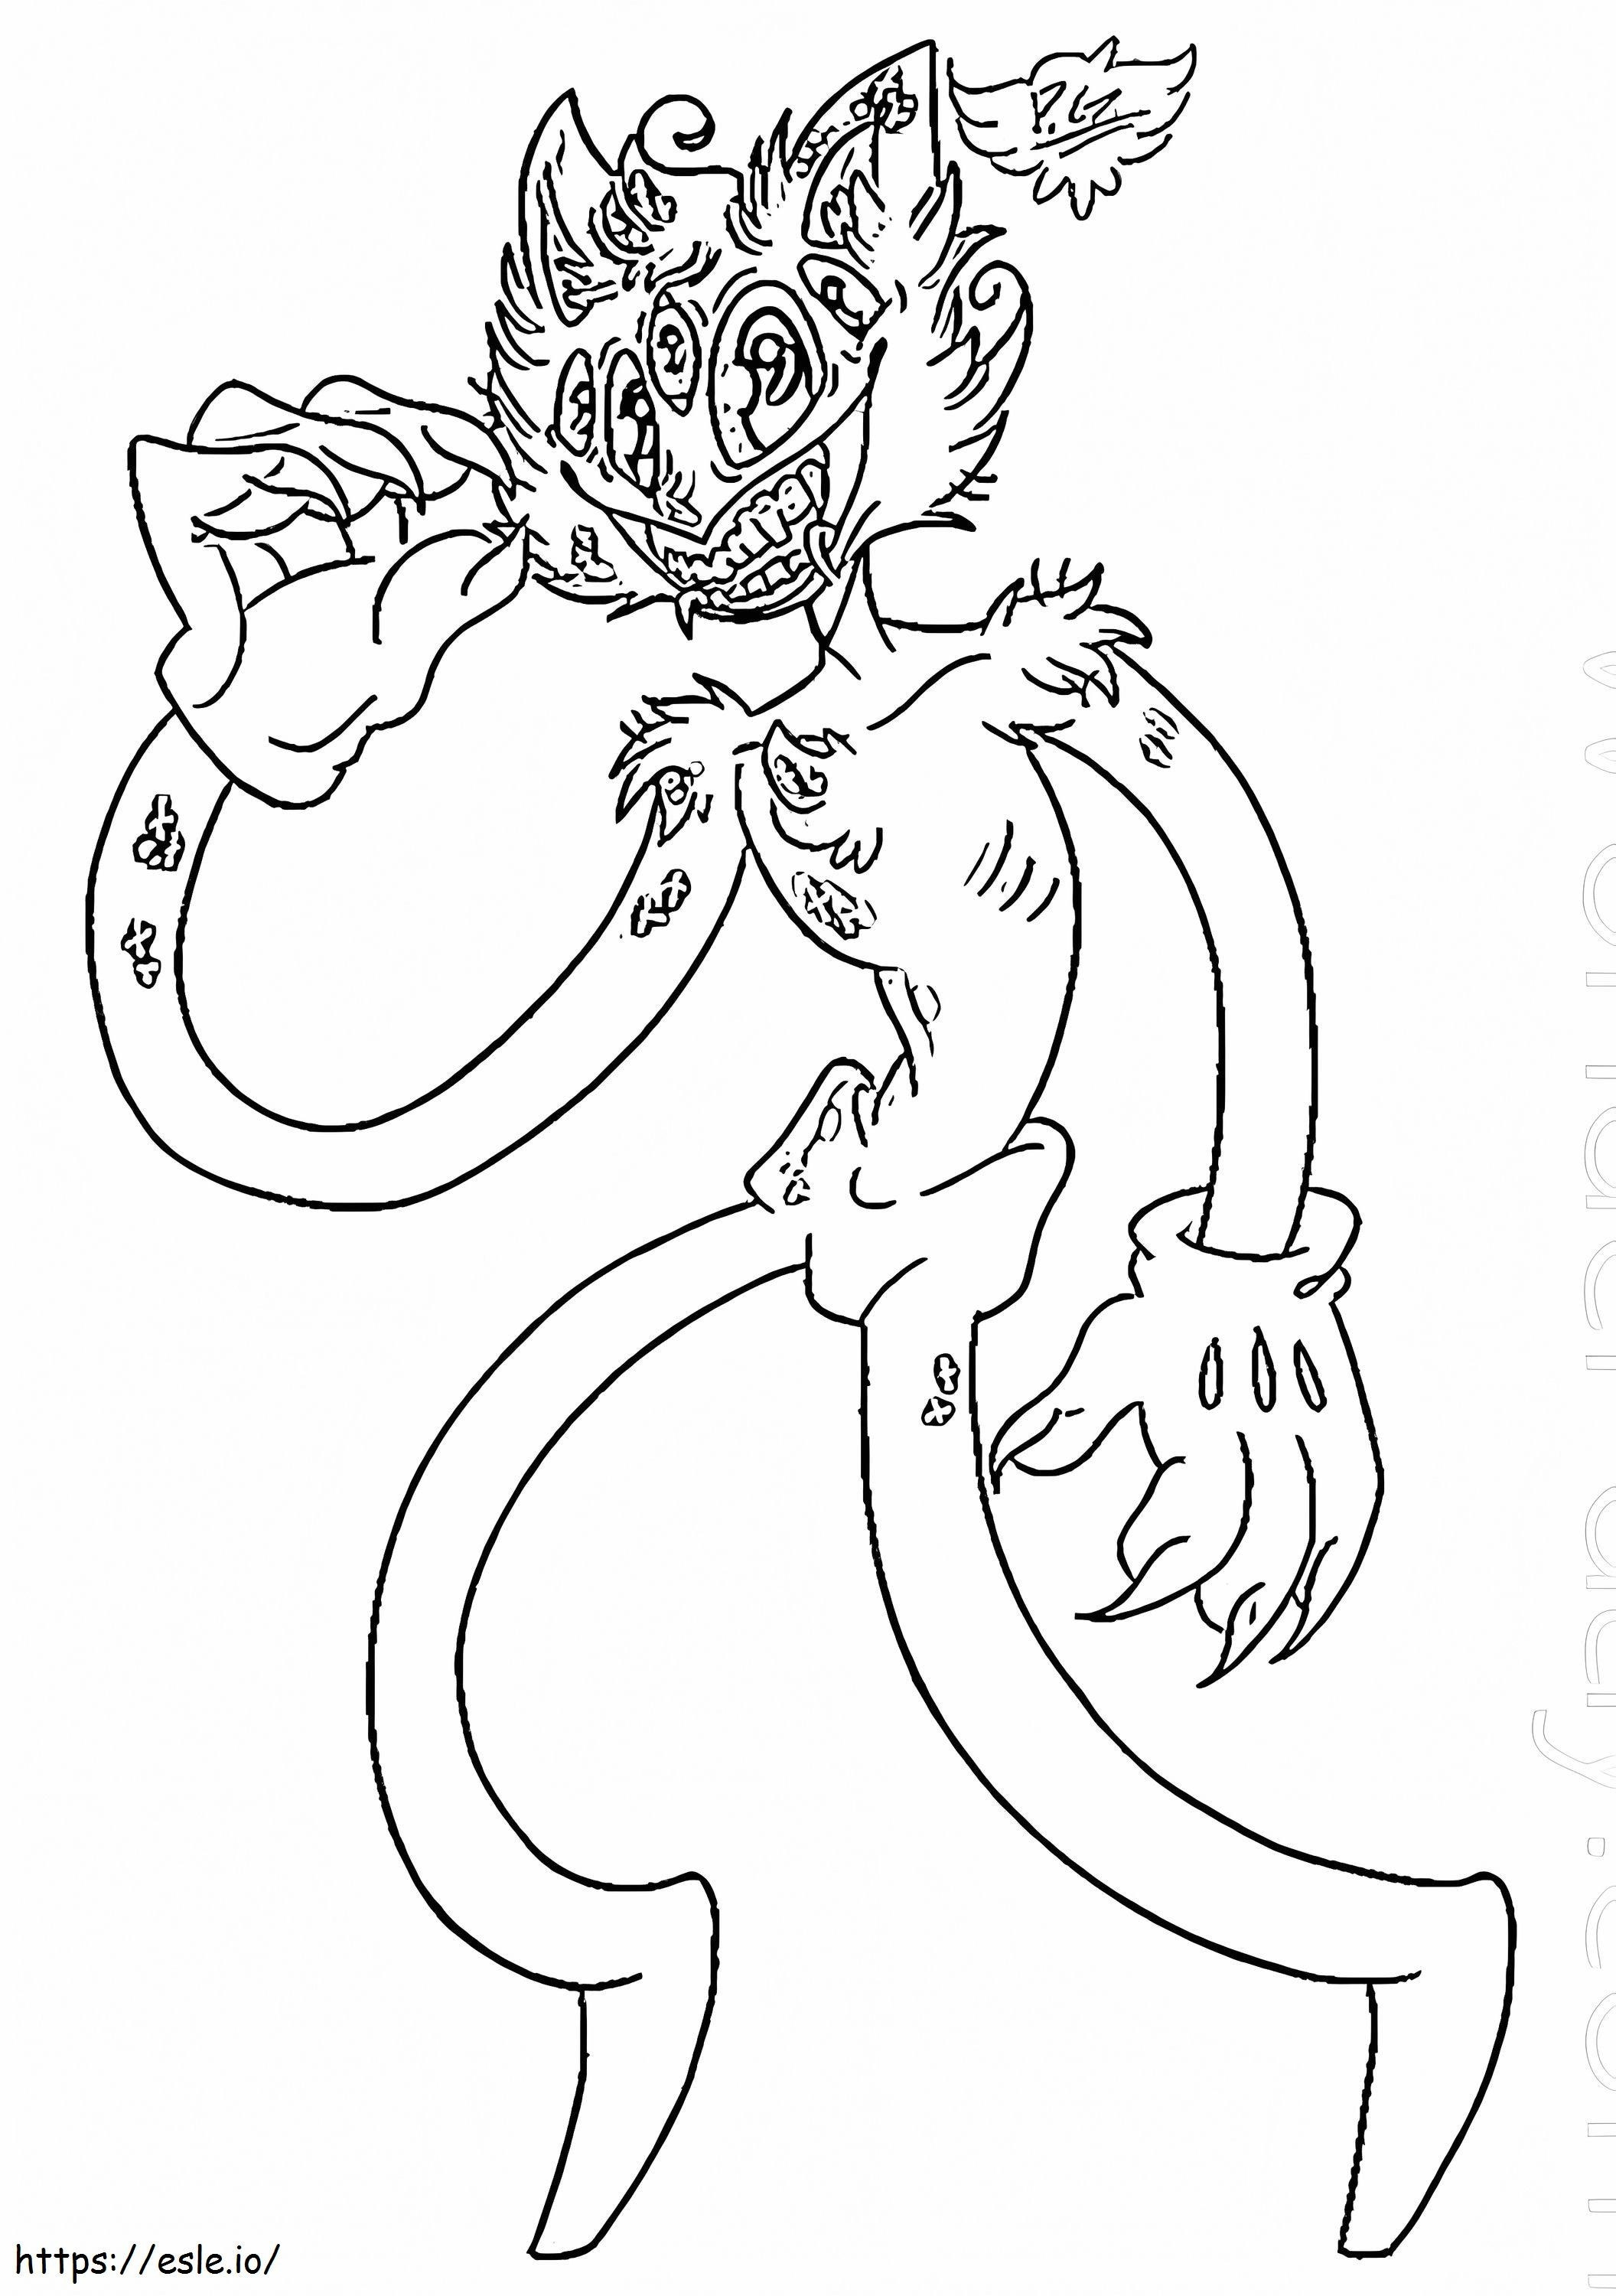 Monster Cartoon Cat coloring page